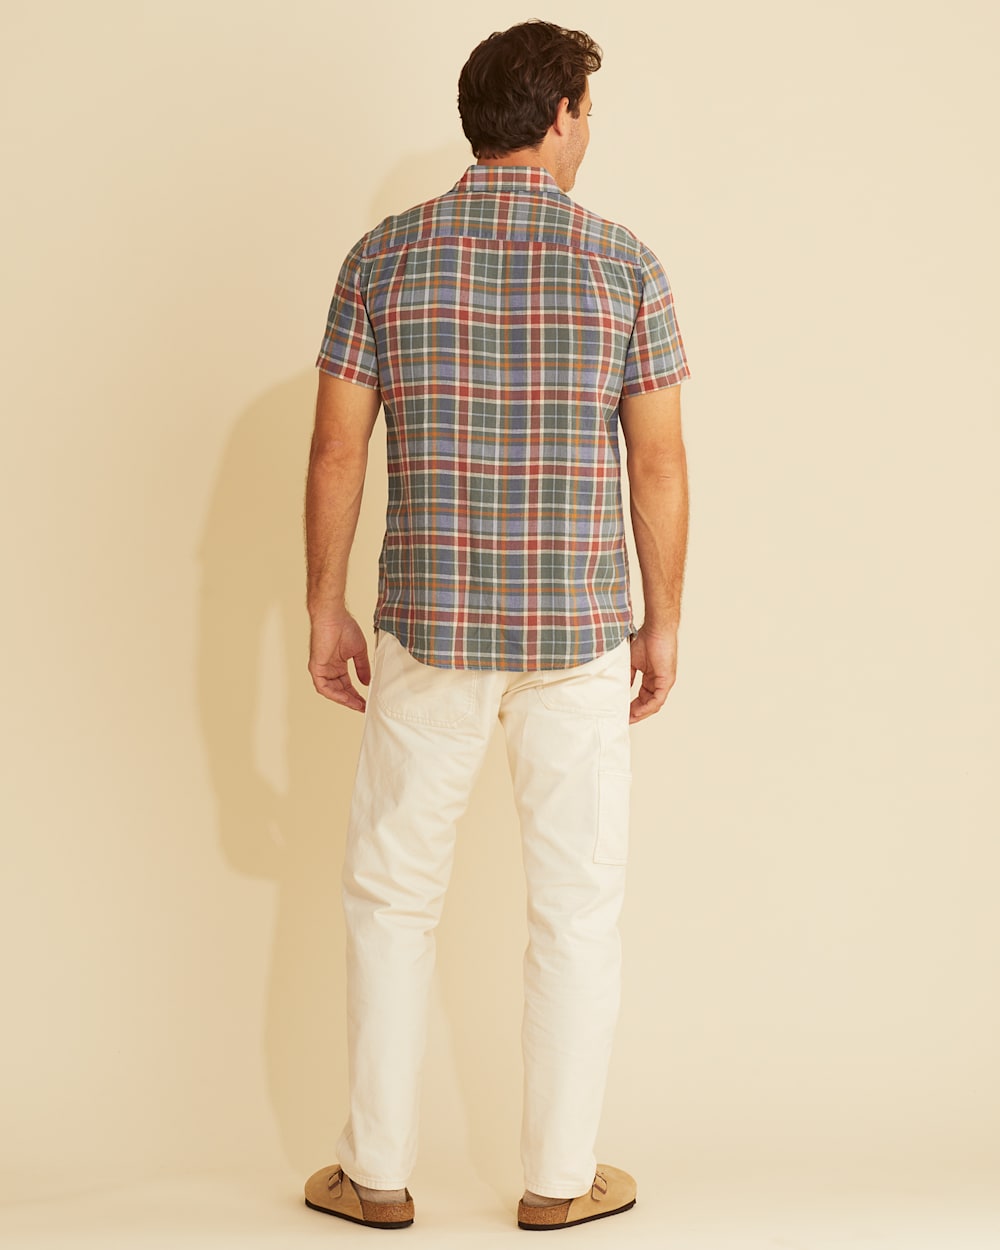 ALTERNATE VIEW OF MEN'S SHORT-SLEEVE DAWSON LINEN SHIRT IN GREEN/BLUE/RED PLAID image number 3